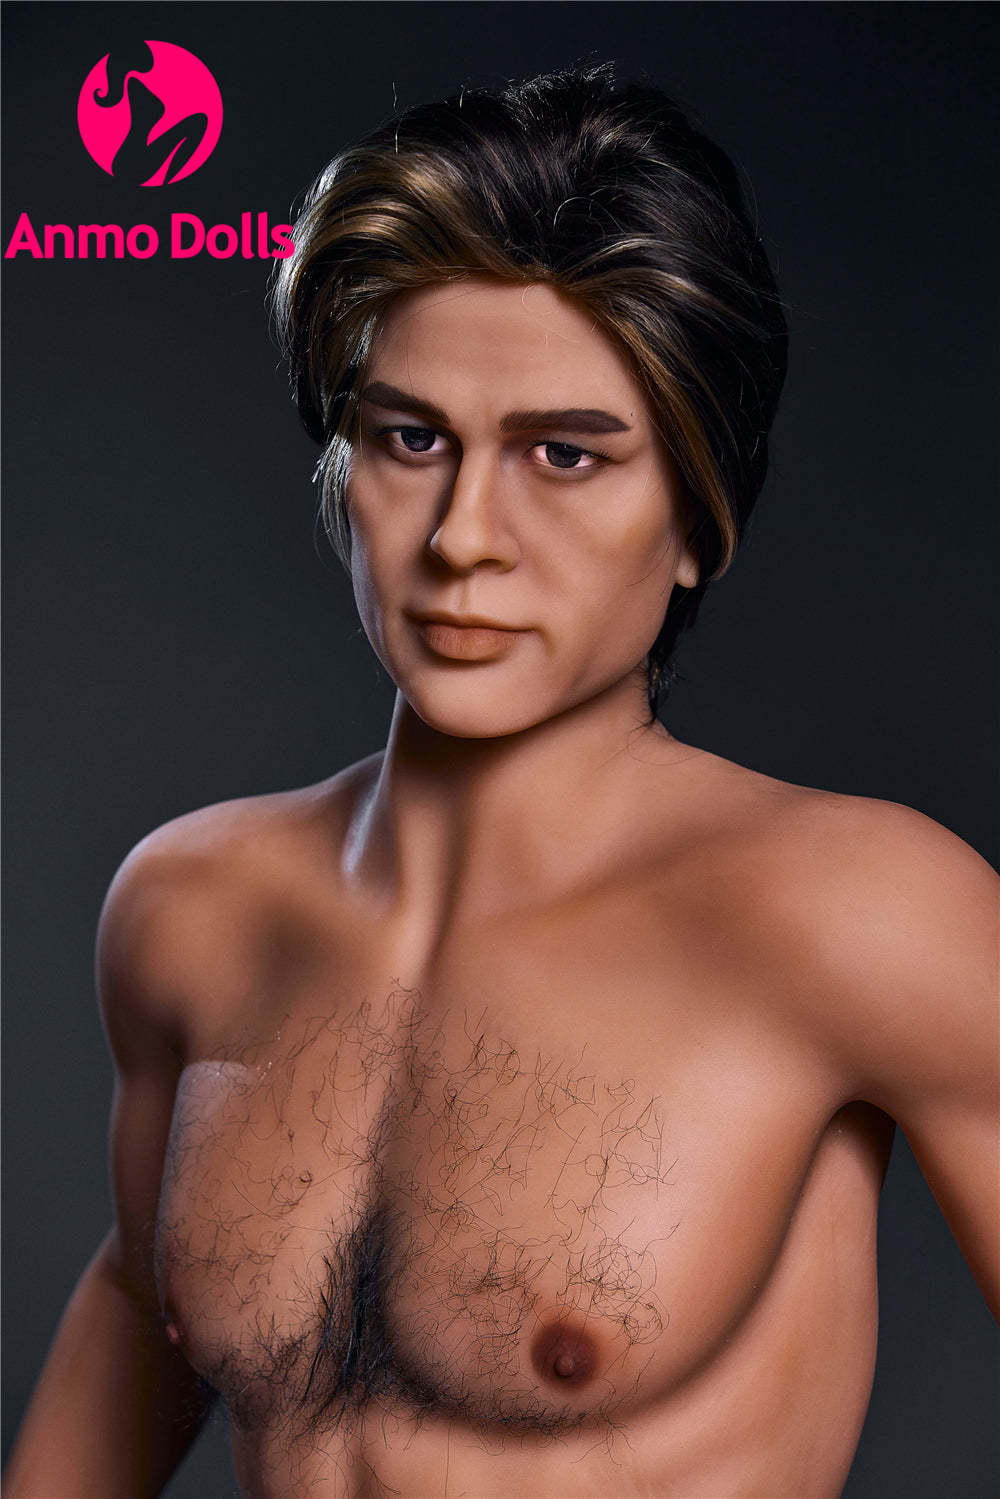 Steffan - Learn Soccer from the hottest Male sex doll by Anmodolls